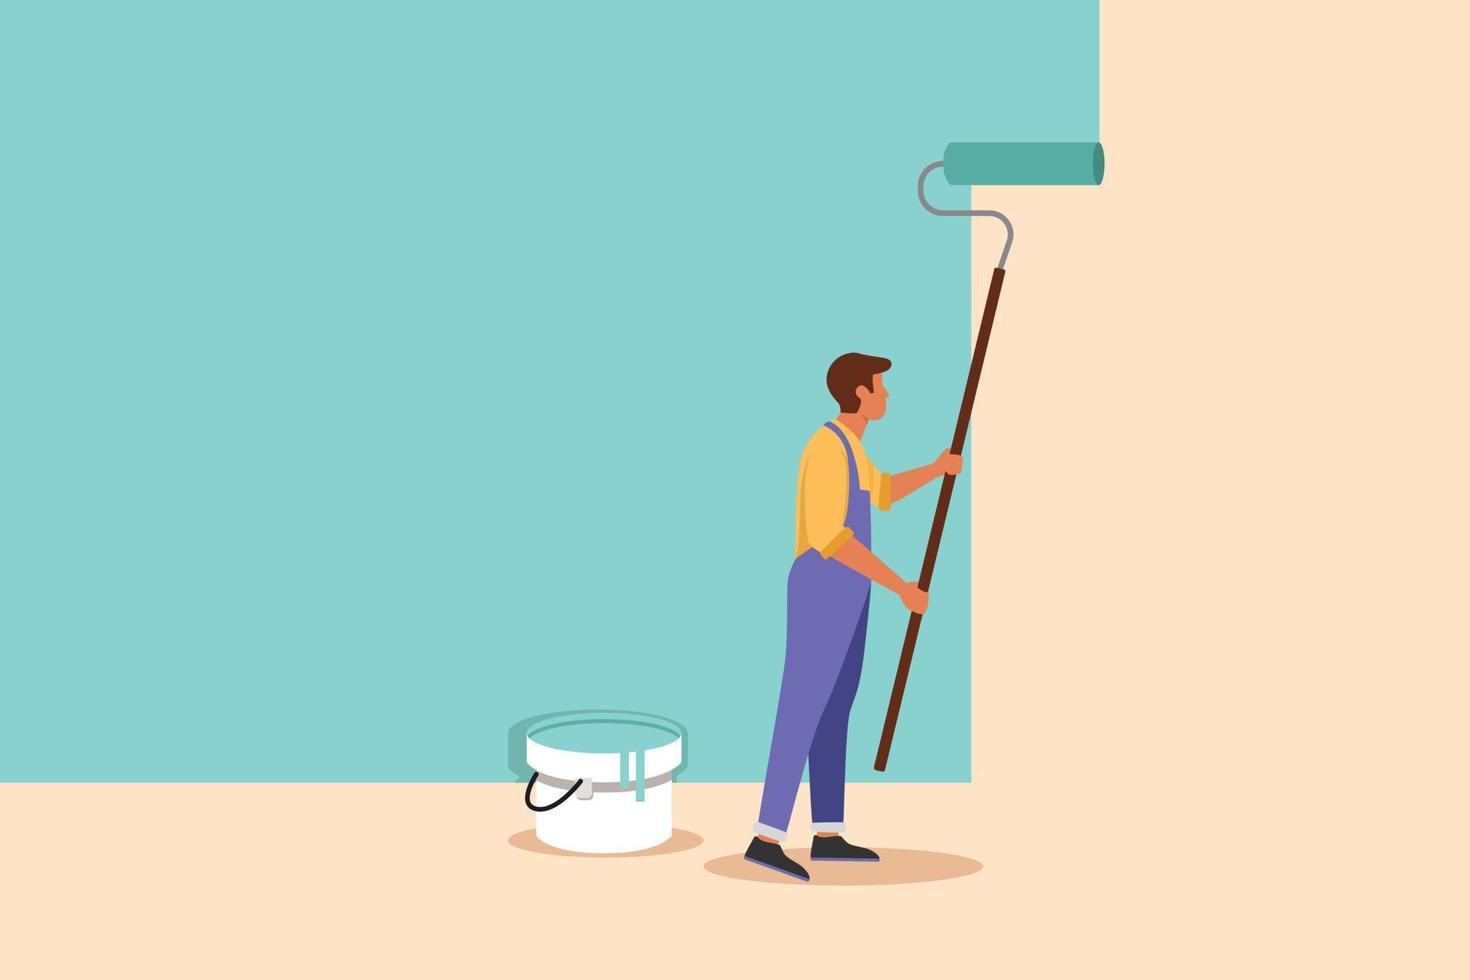 Business flat drawing professional handyman painting wall with roller. Home repair, decoration, renovation, freshen up. Active repairman painter professional work. Cartoon design vector illustration